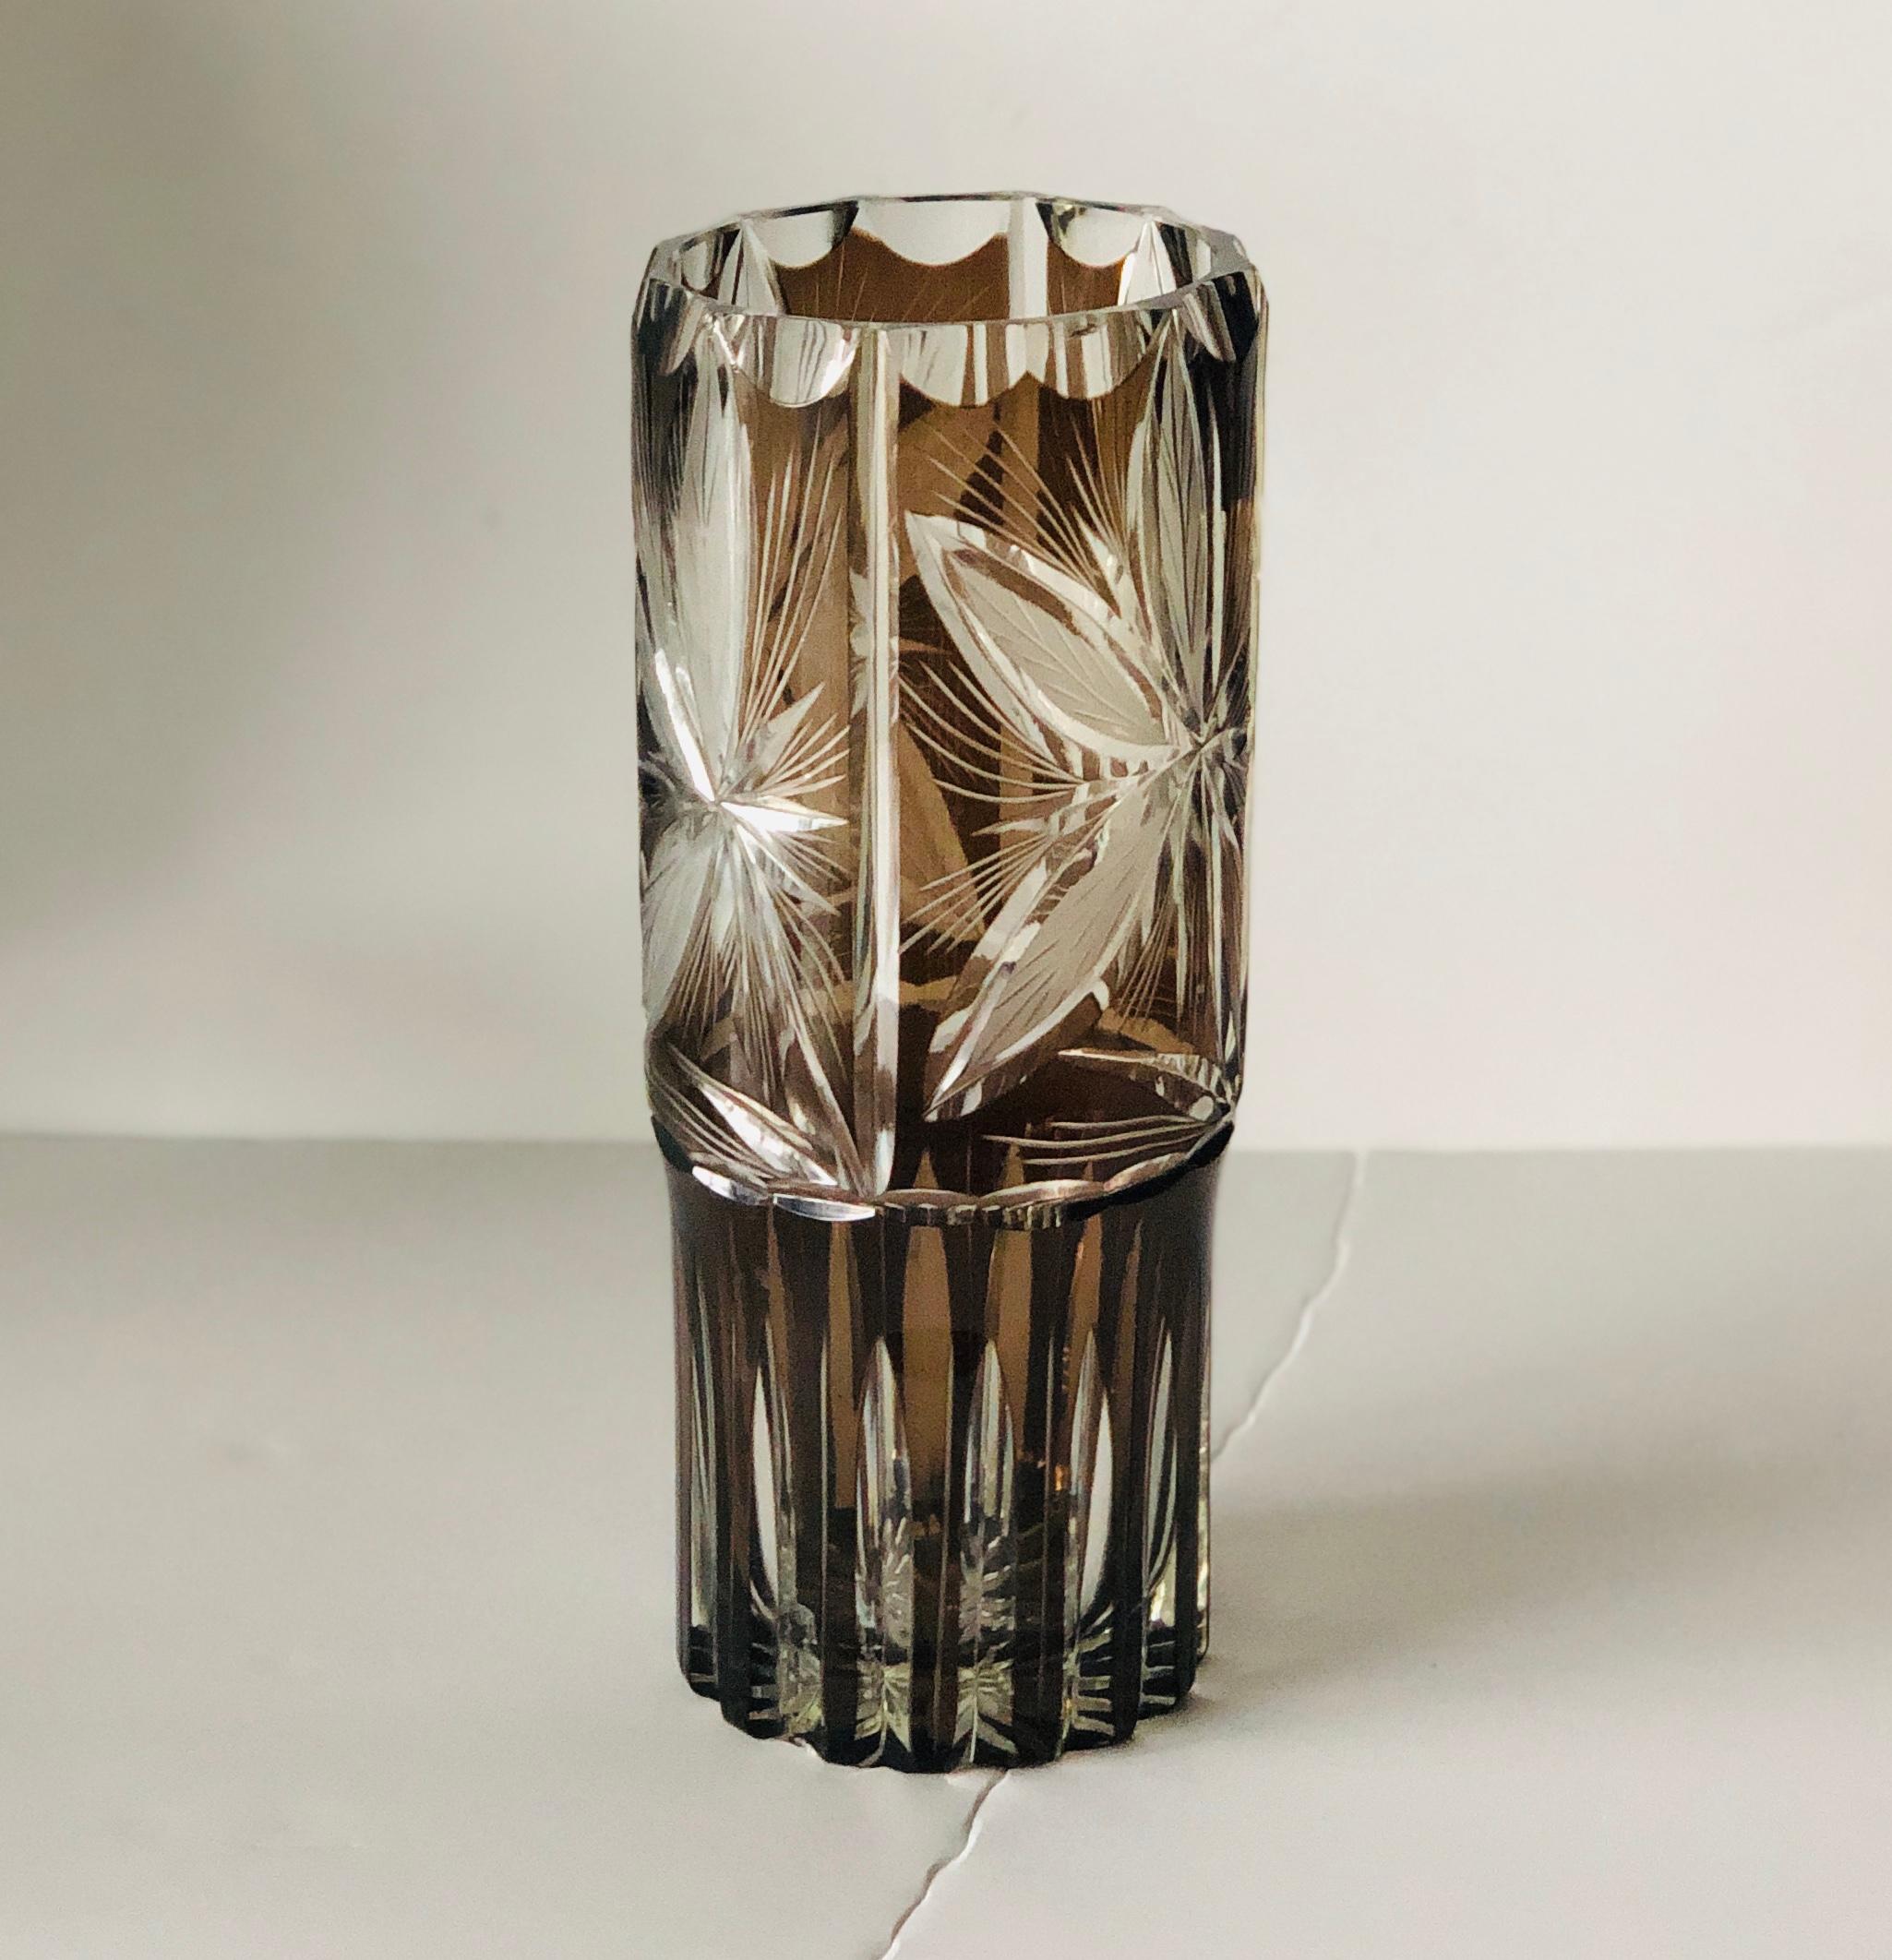 Offered is a Mid-Century Modern Argentinean cut crystal amber brown and clear glass flower vase with a large modern lily floral design. The crystal is cut in such a way to give a modern versus old fashioned look. Perfect size for a floral display.